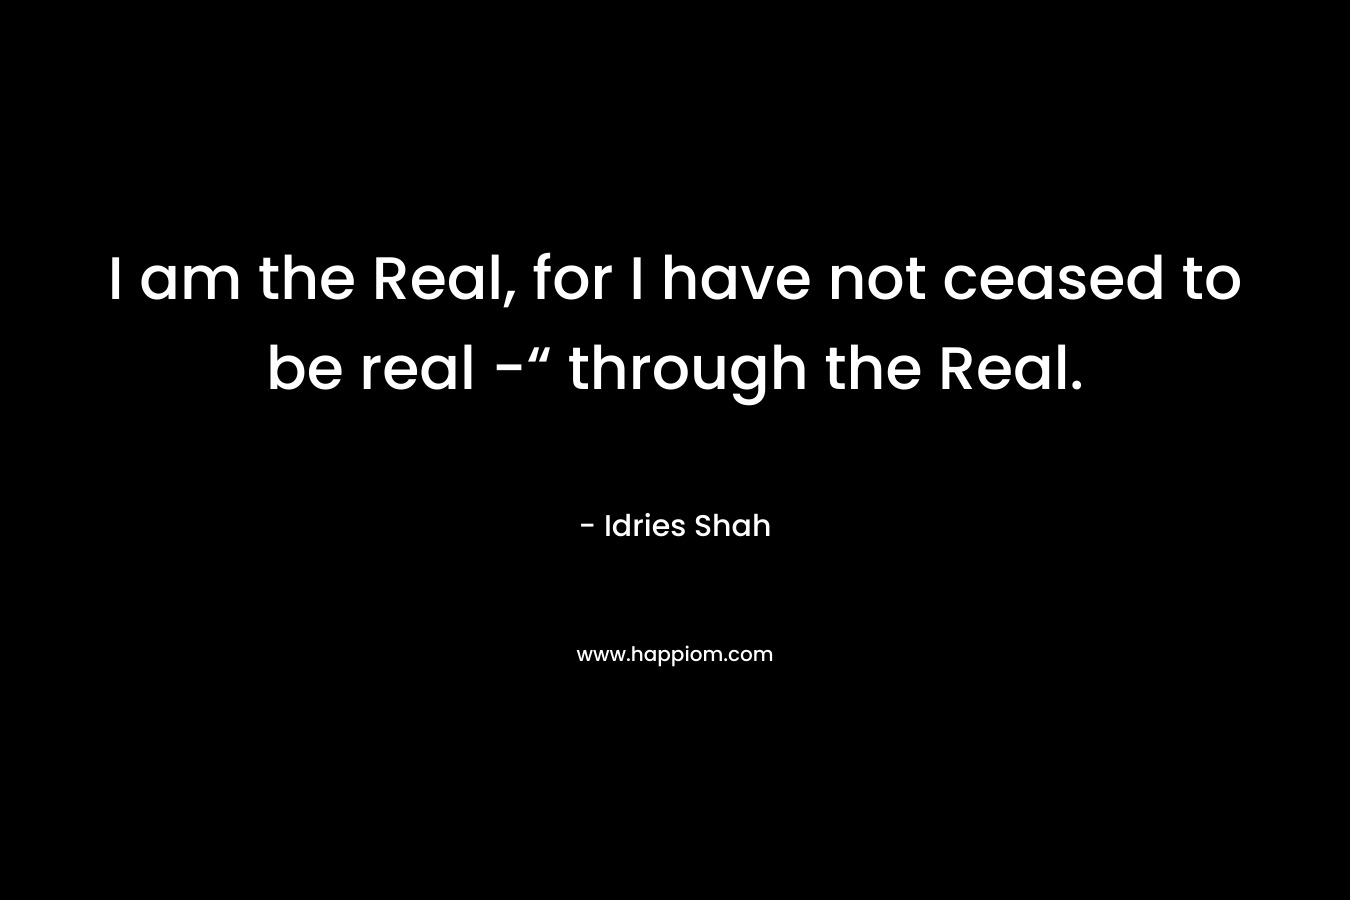 I am the Real, for I have not ceased to be real -“ through the Real. – Idries Shah